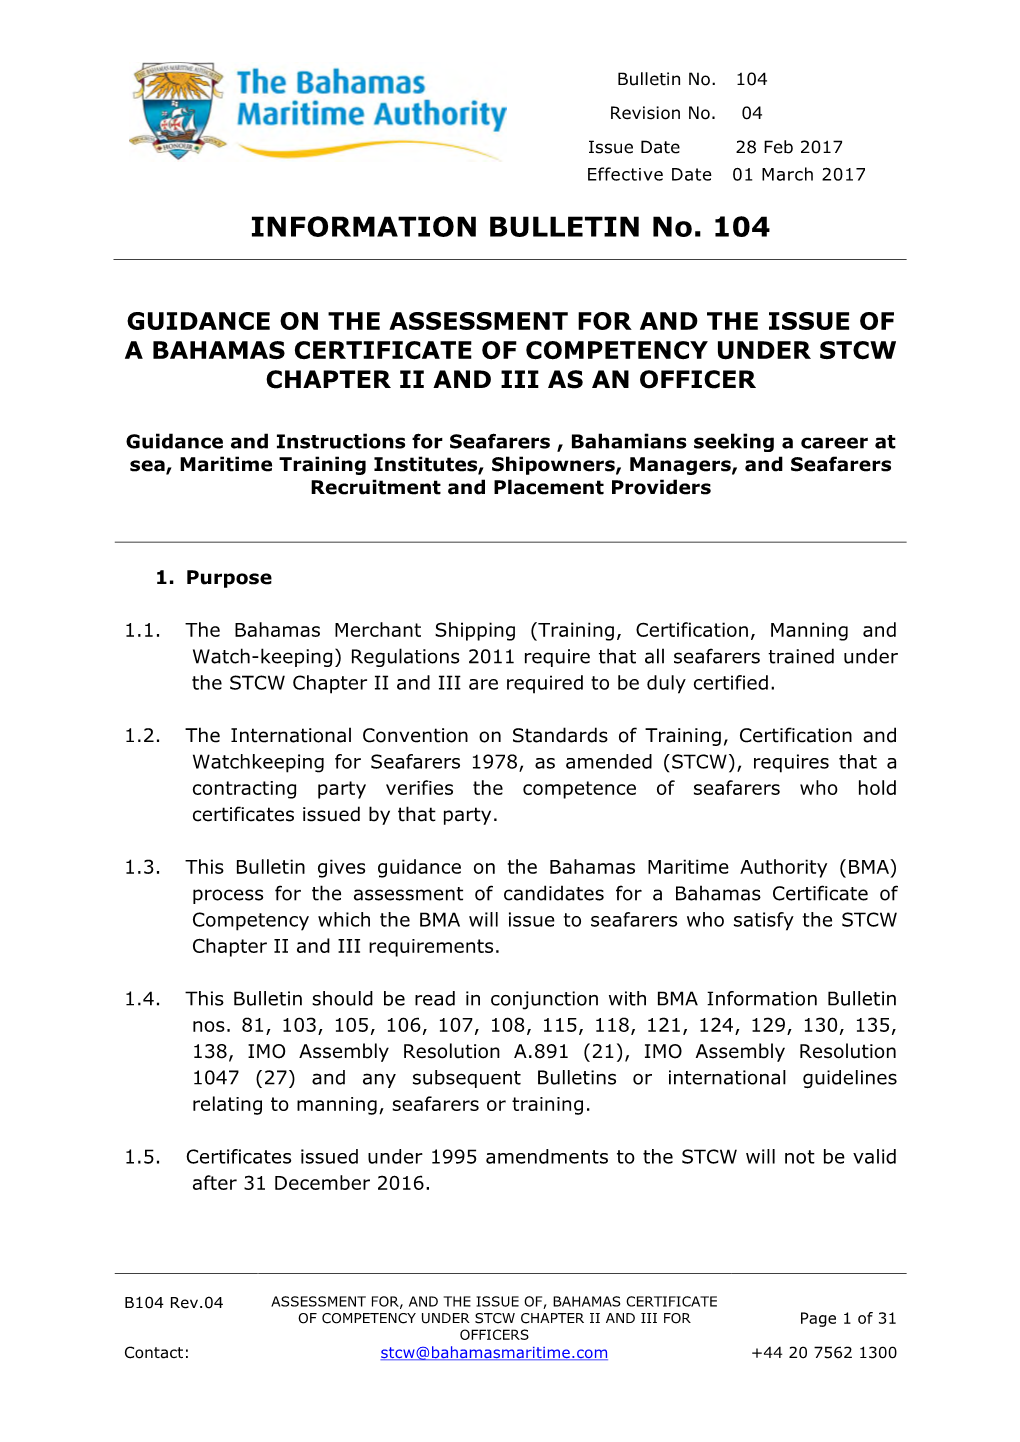 BMA Bulletin 104 – Bahamas Certificate of Competency Type